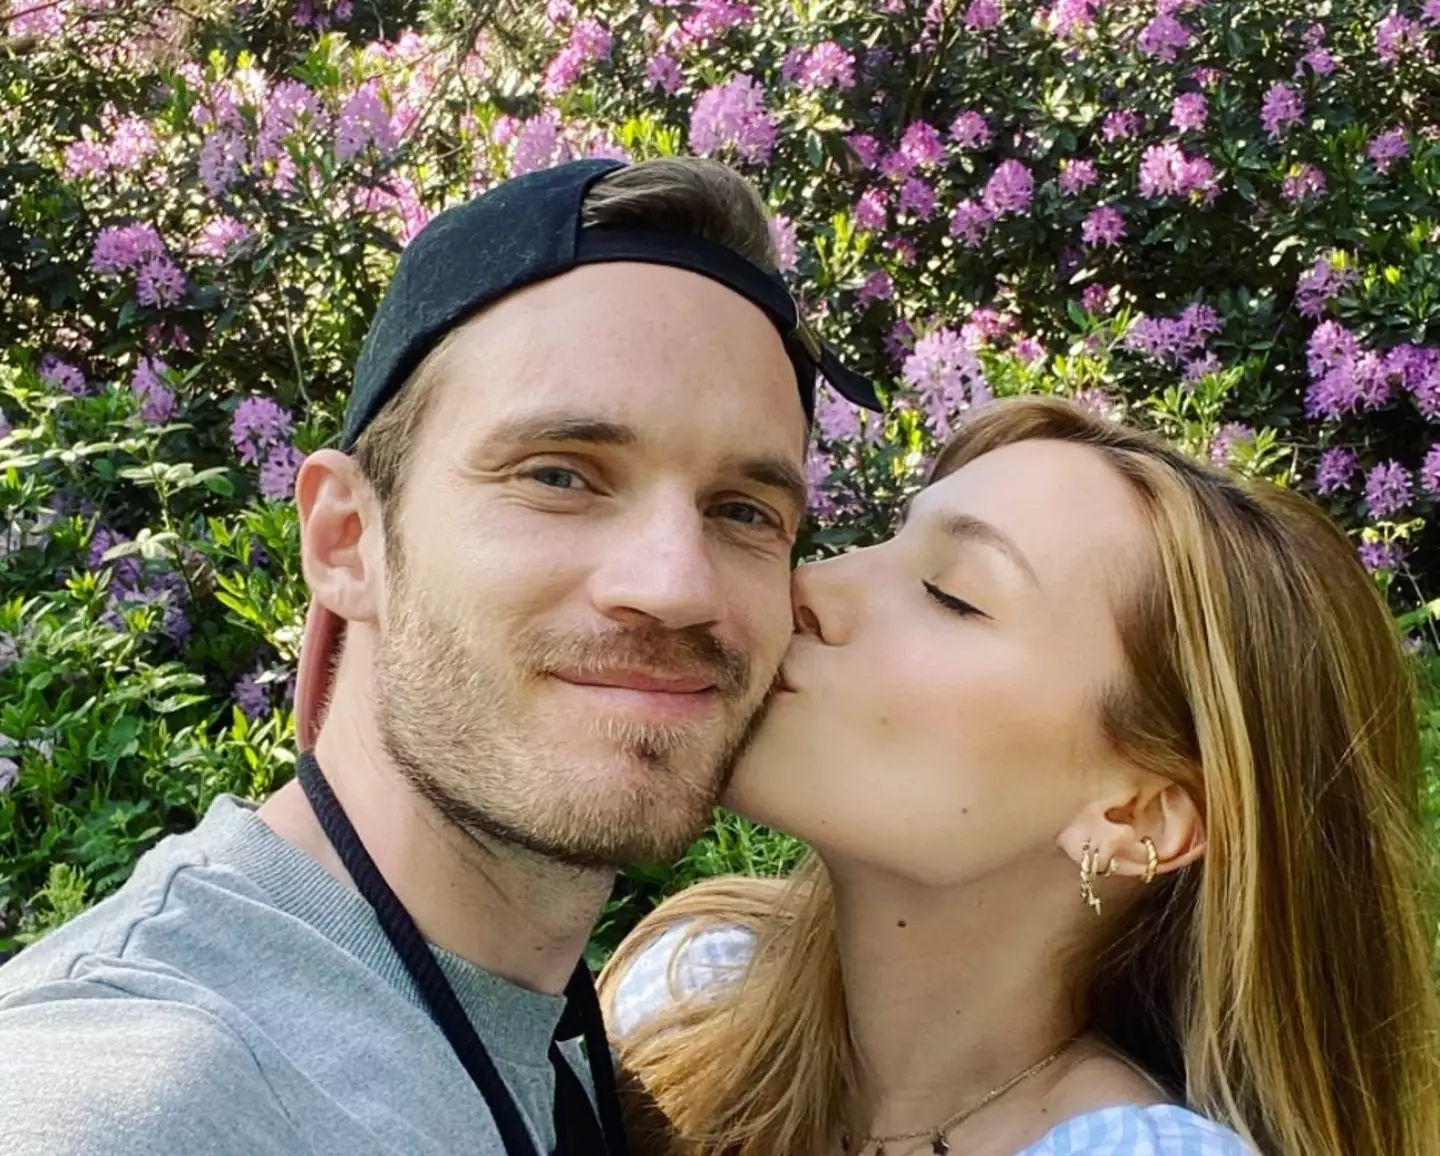 PewDiePie and Marzia know multiple languages.